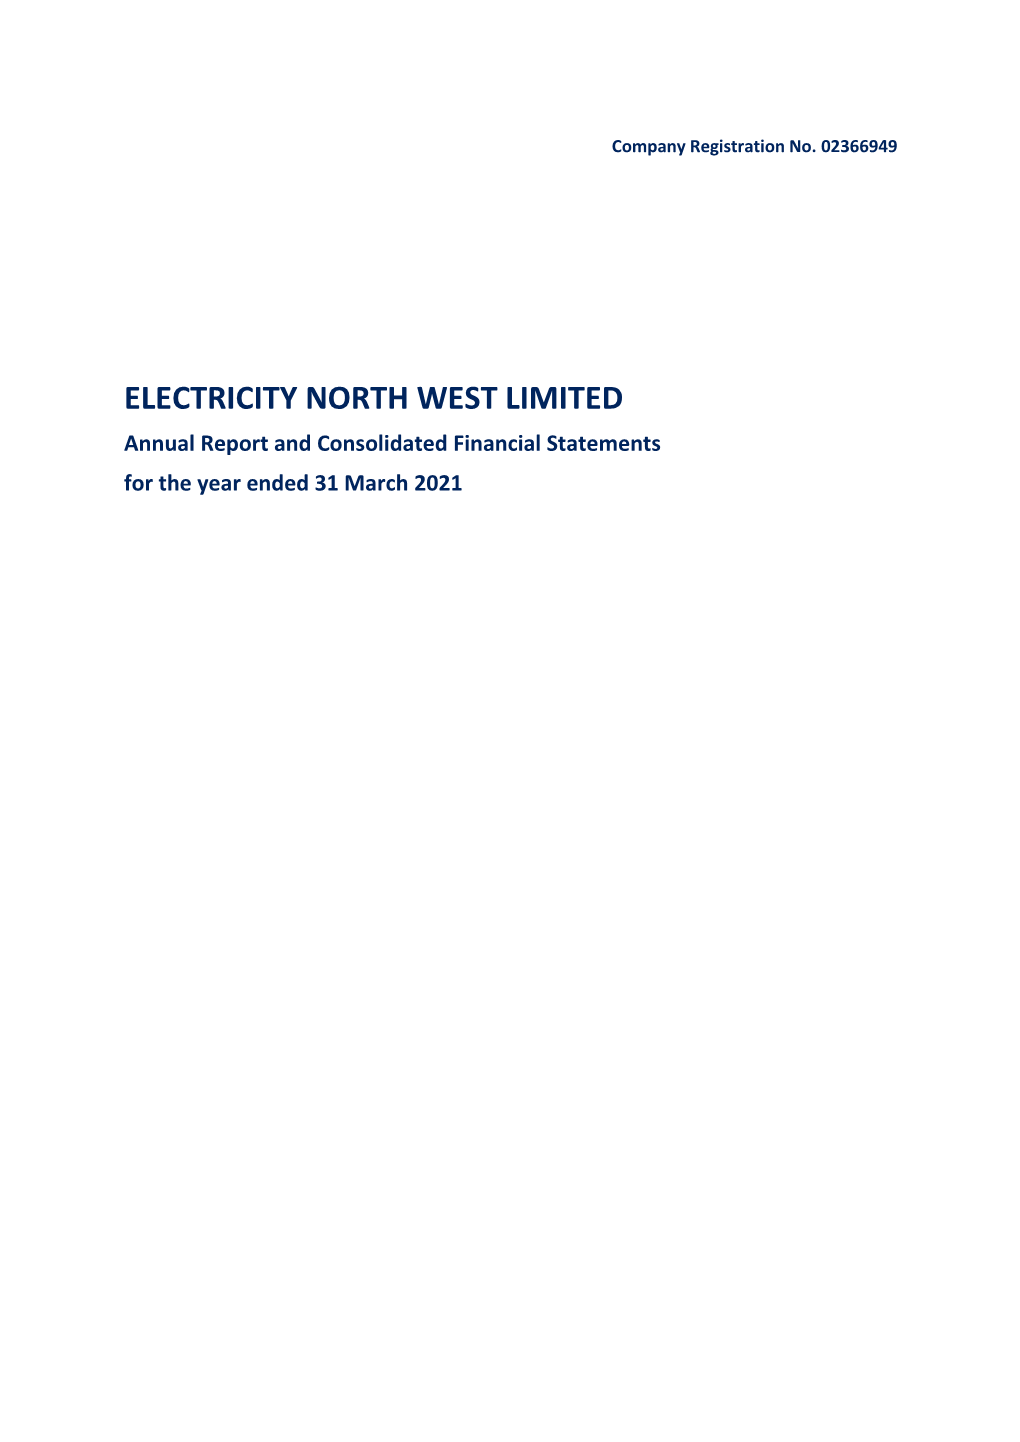 Pdf Electricity North West Limited Annual Report and Financial